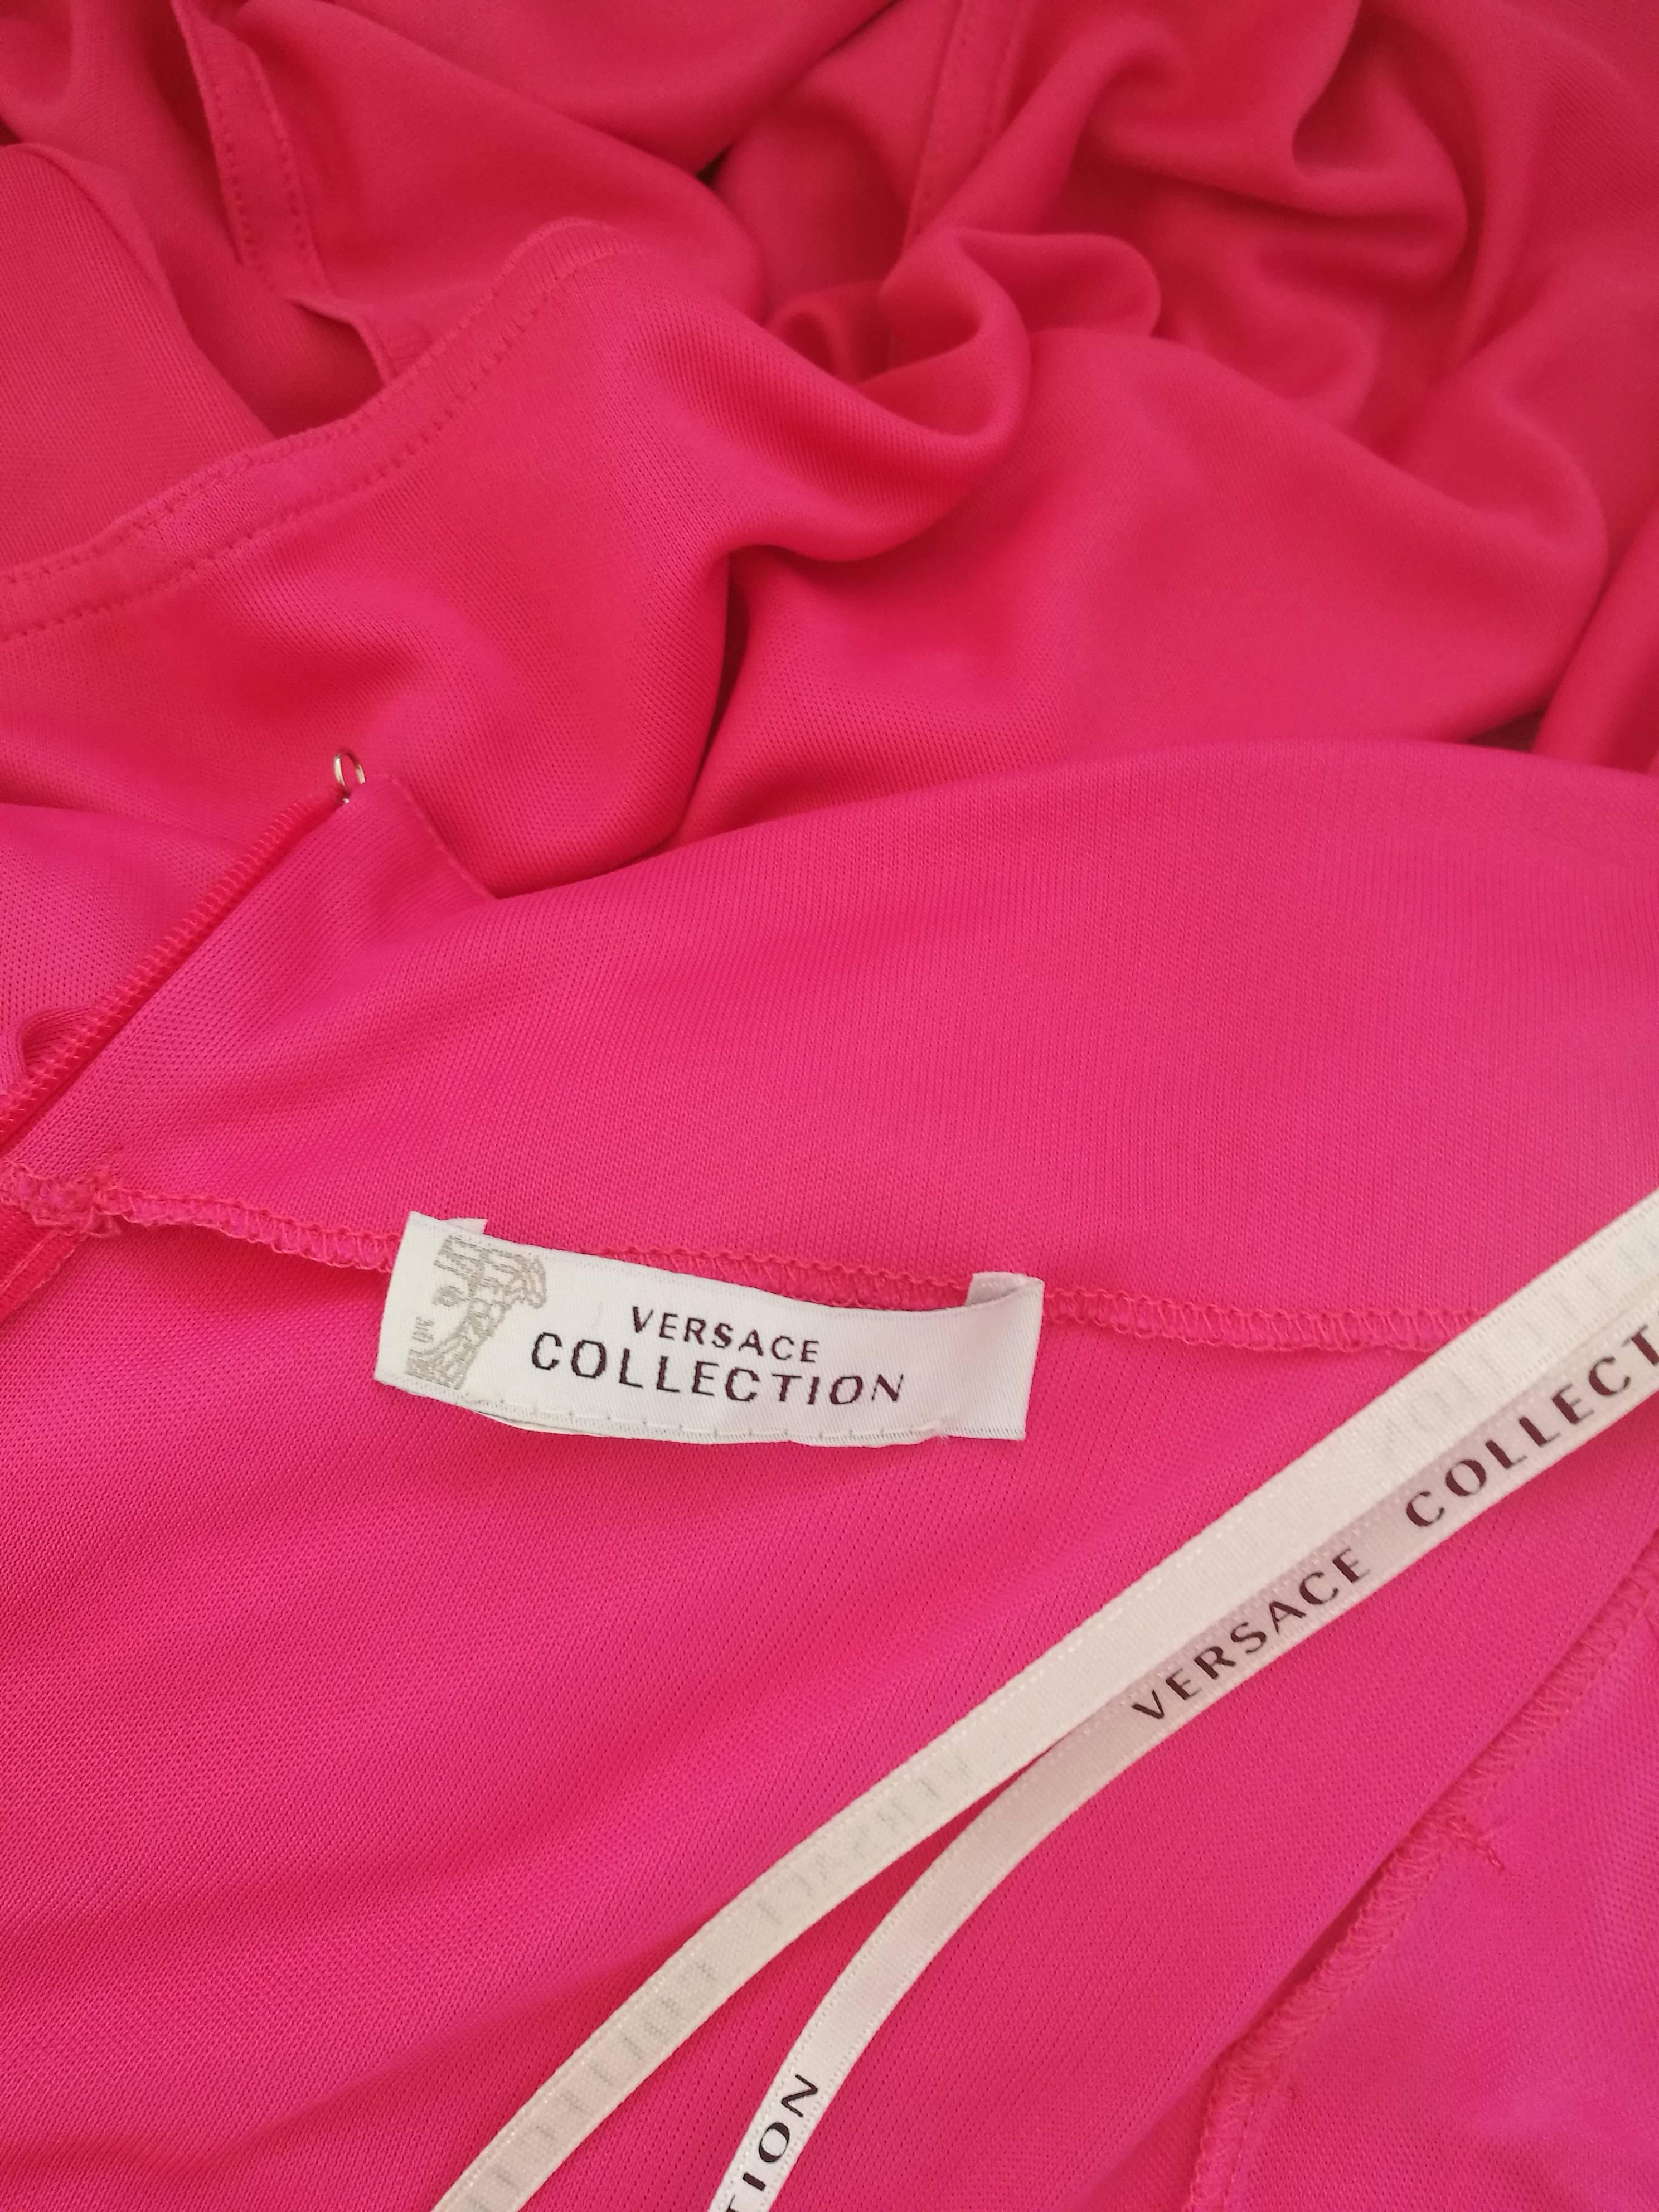 Versace Collection Pink Dress In Excellent Condition In Capri, IT